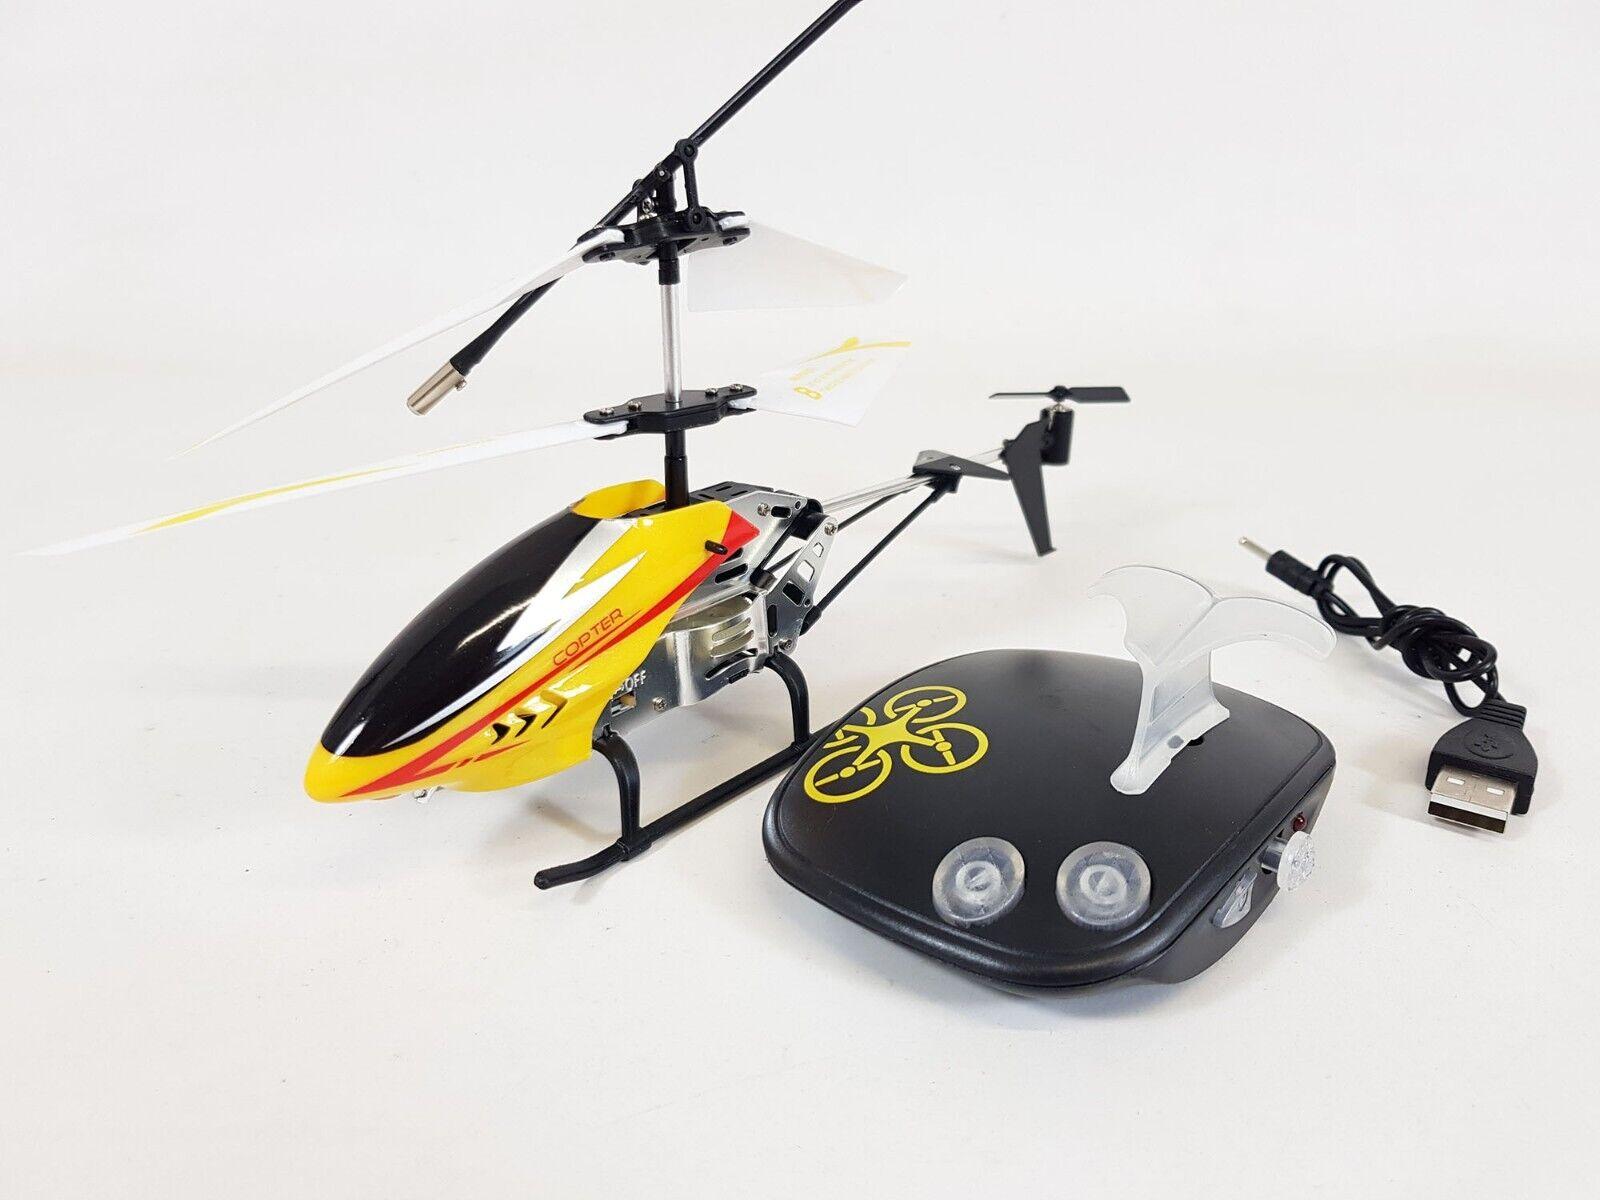 Smart Remote Control Helicopter: A Closer Look at Smart Remote Control Helicopters